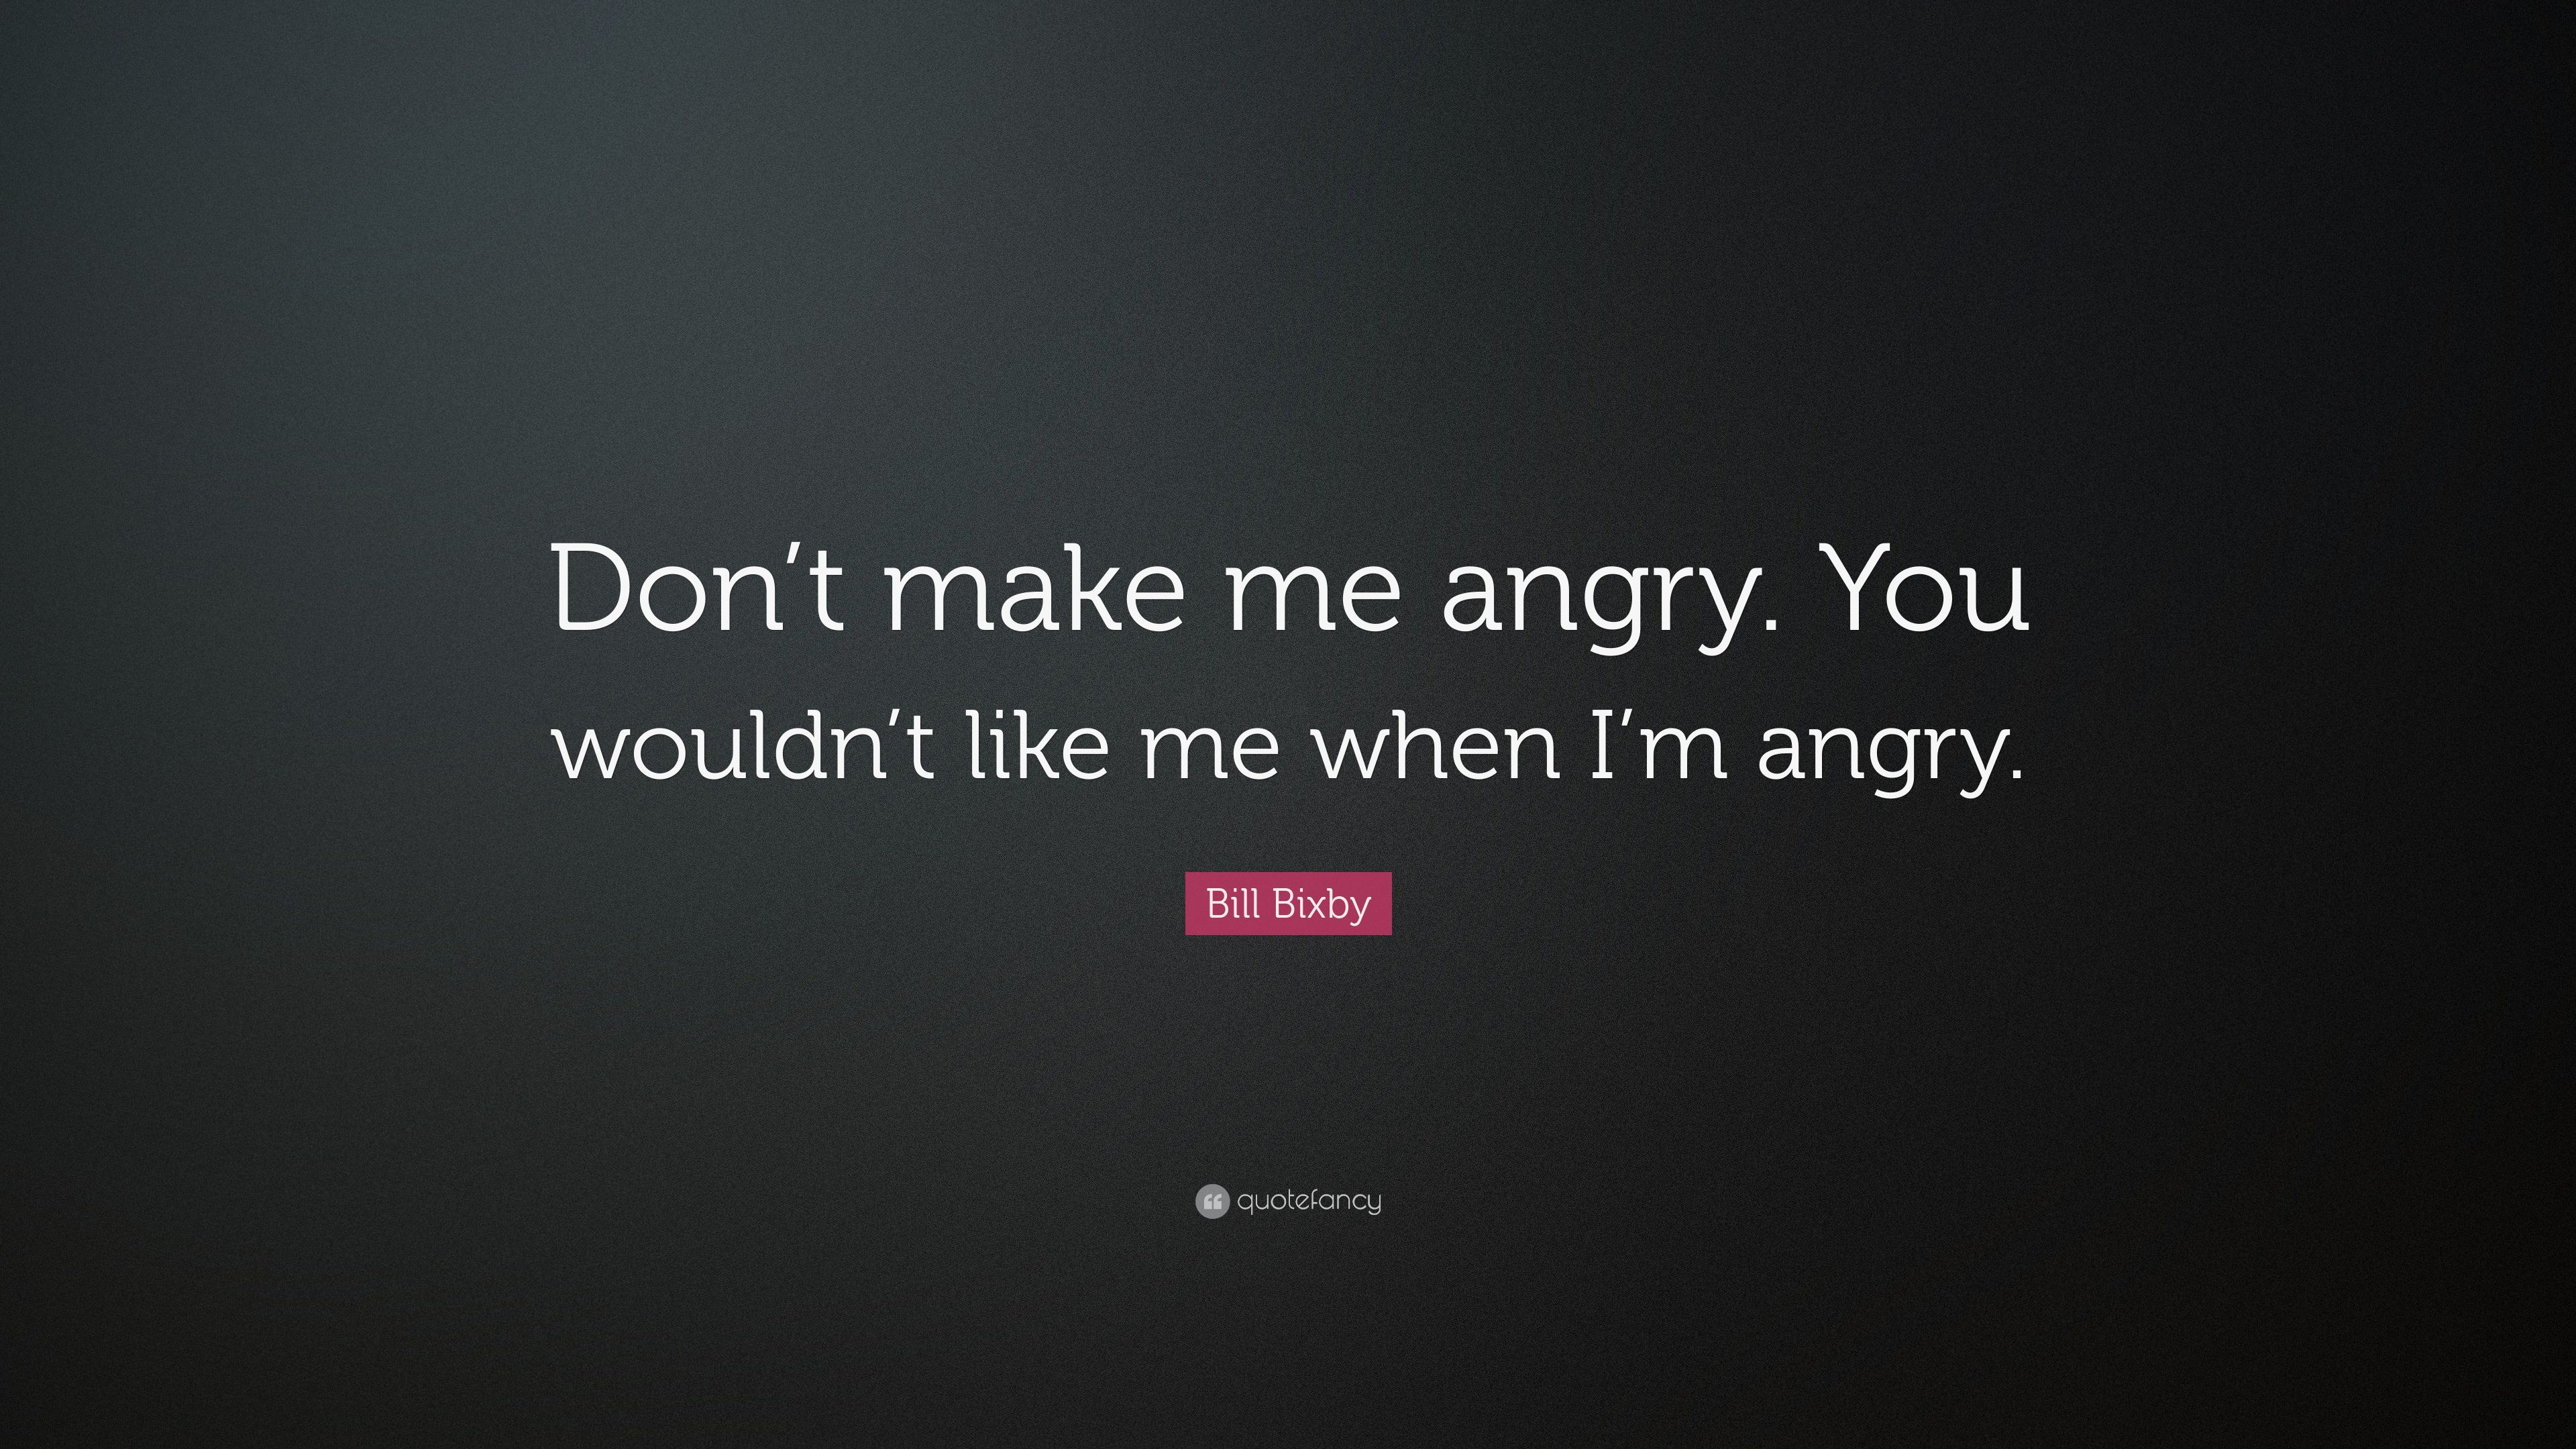 Bill Bixby Quote: “Don't make me angry. You wouldn't like me when I'm